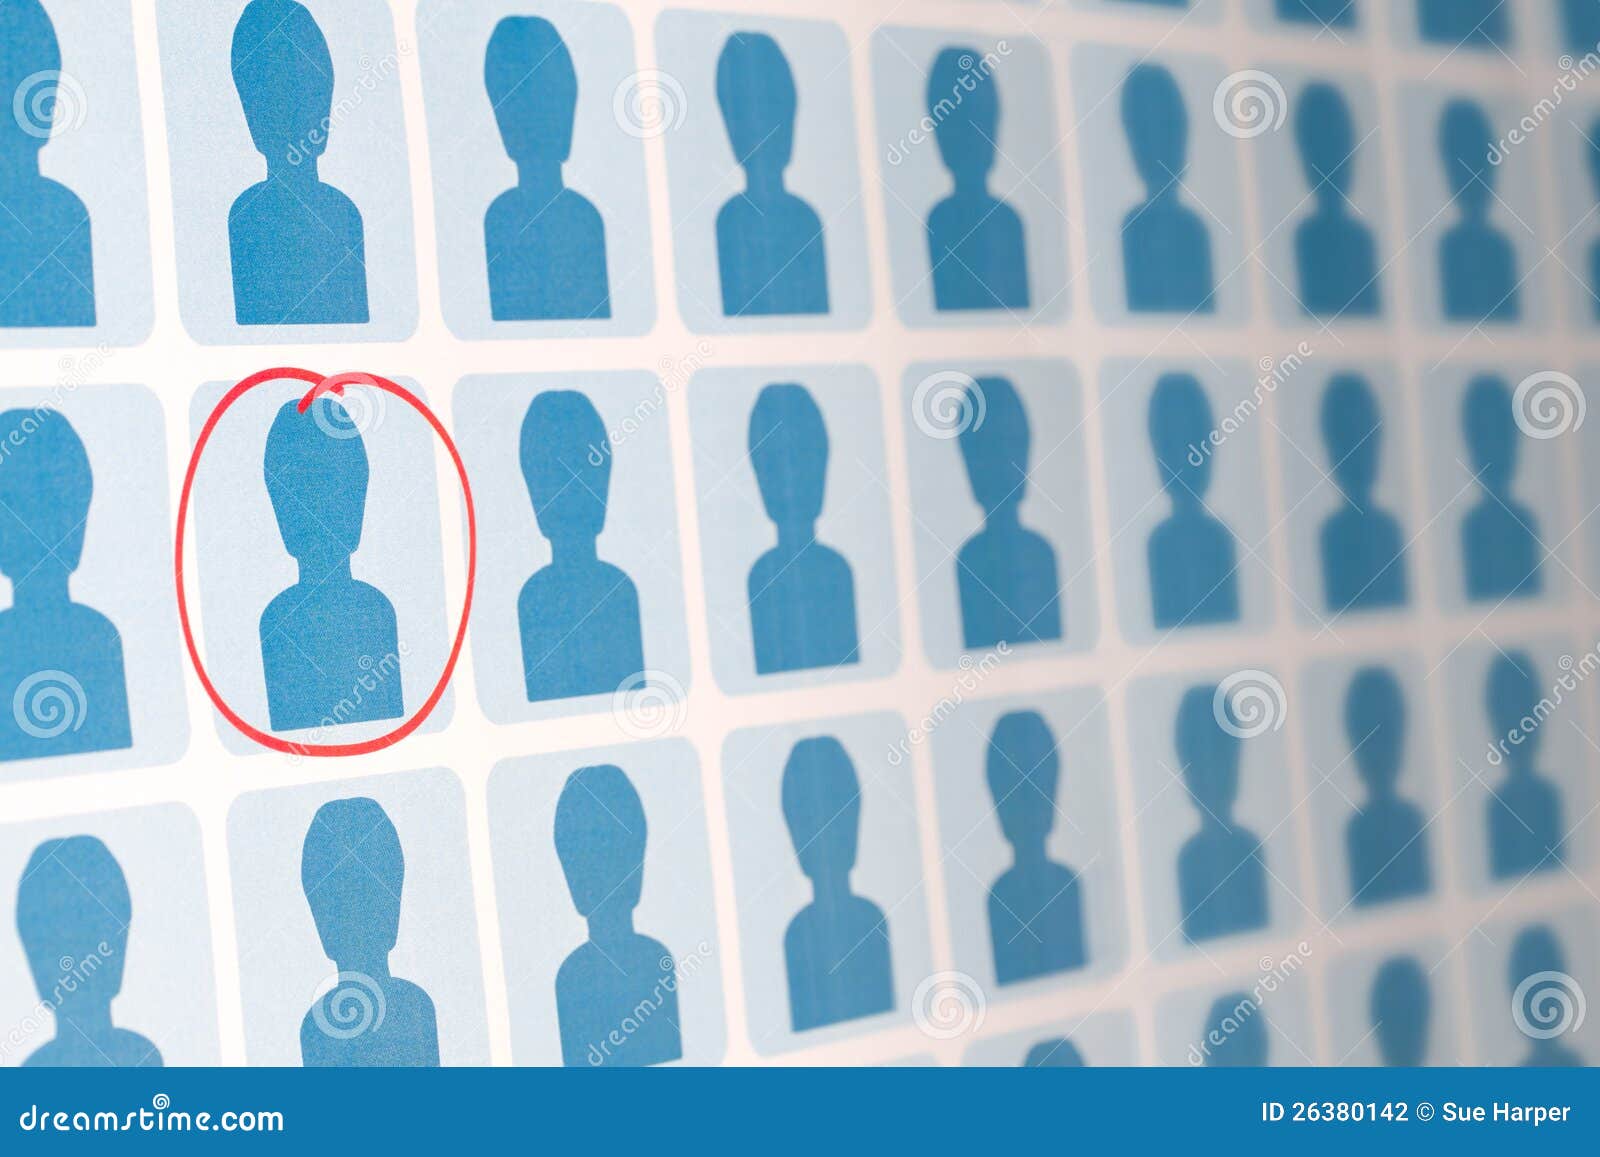 blue people with one candidate selected